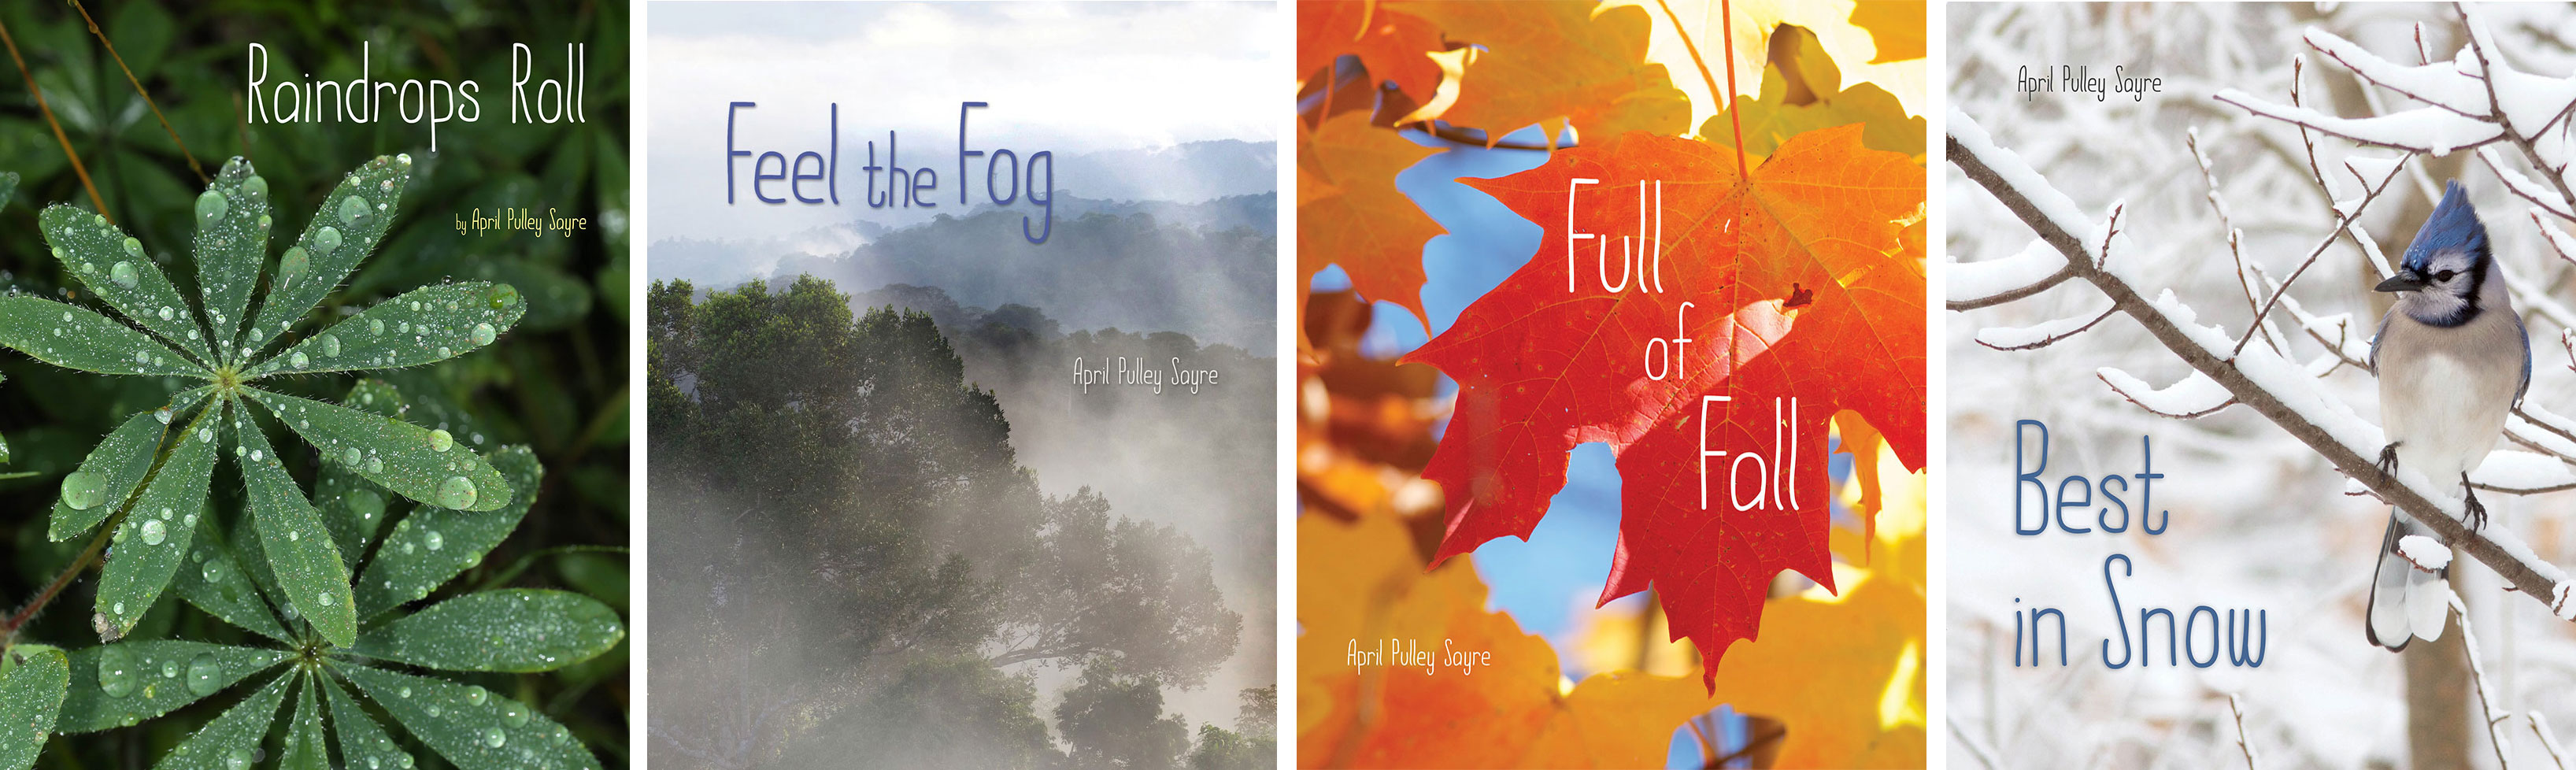 Weather Walks photo books by April Pulley Sayre